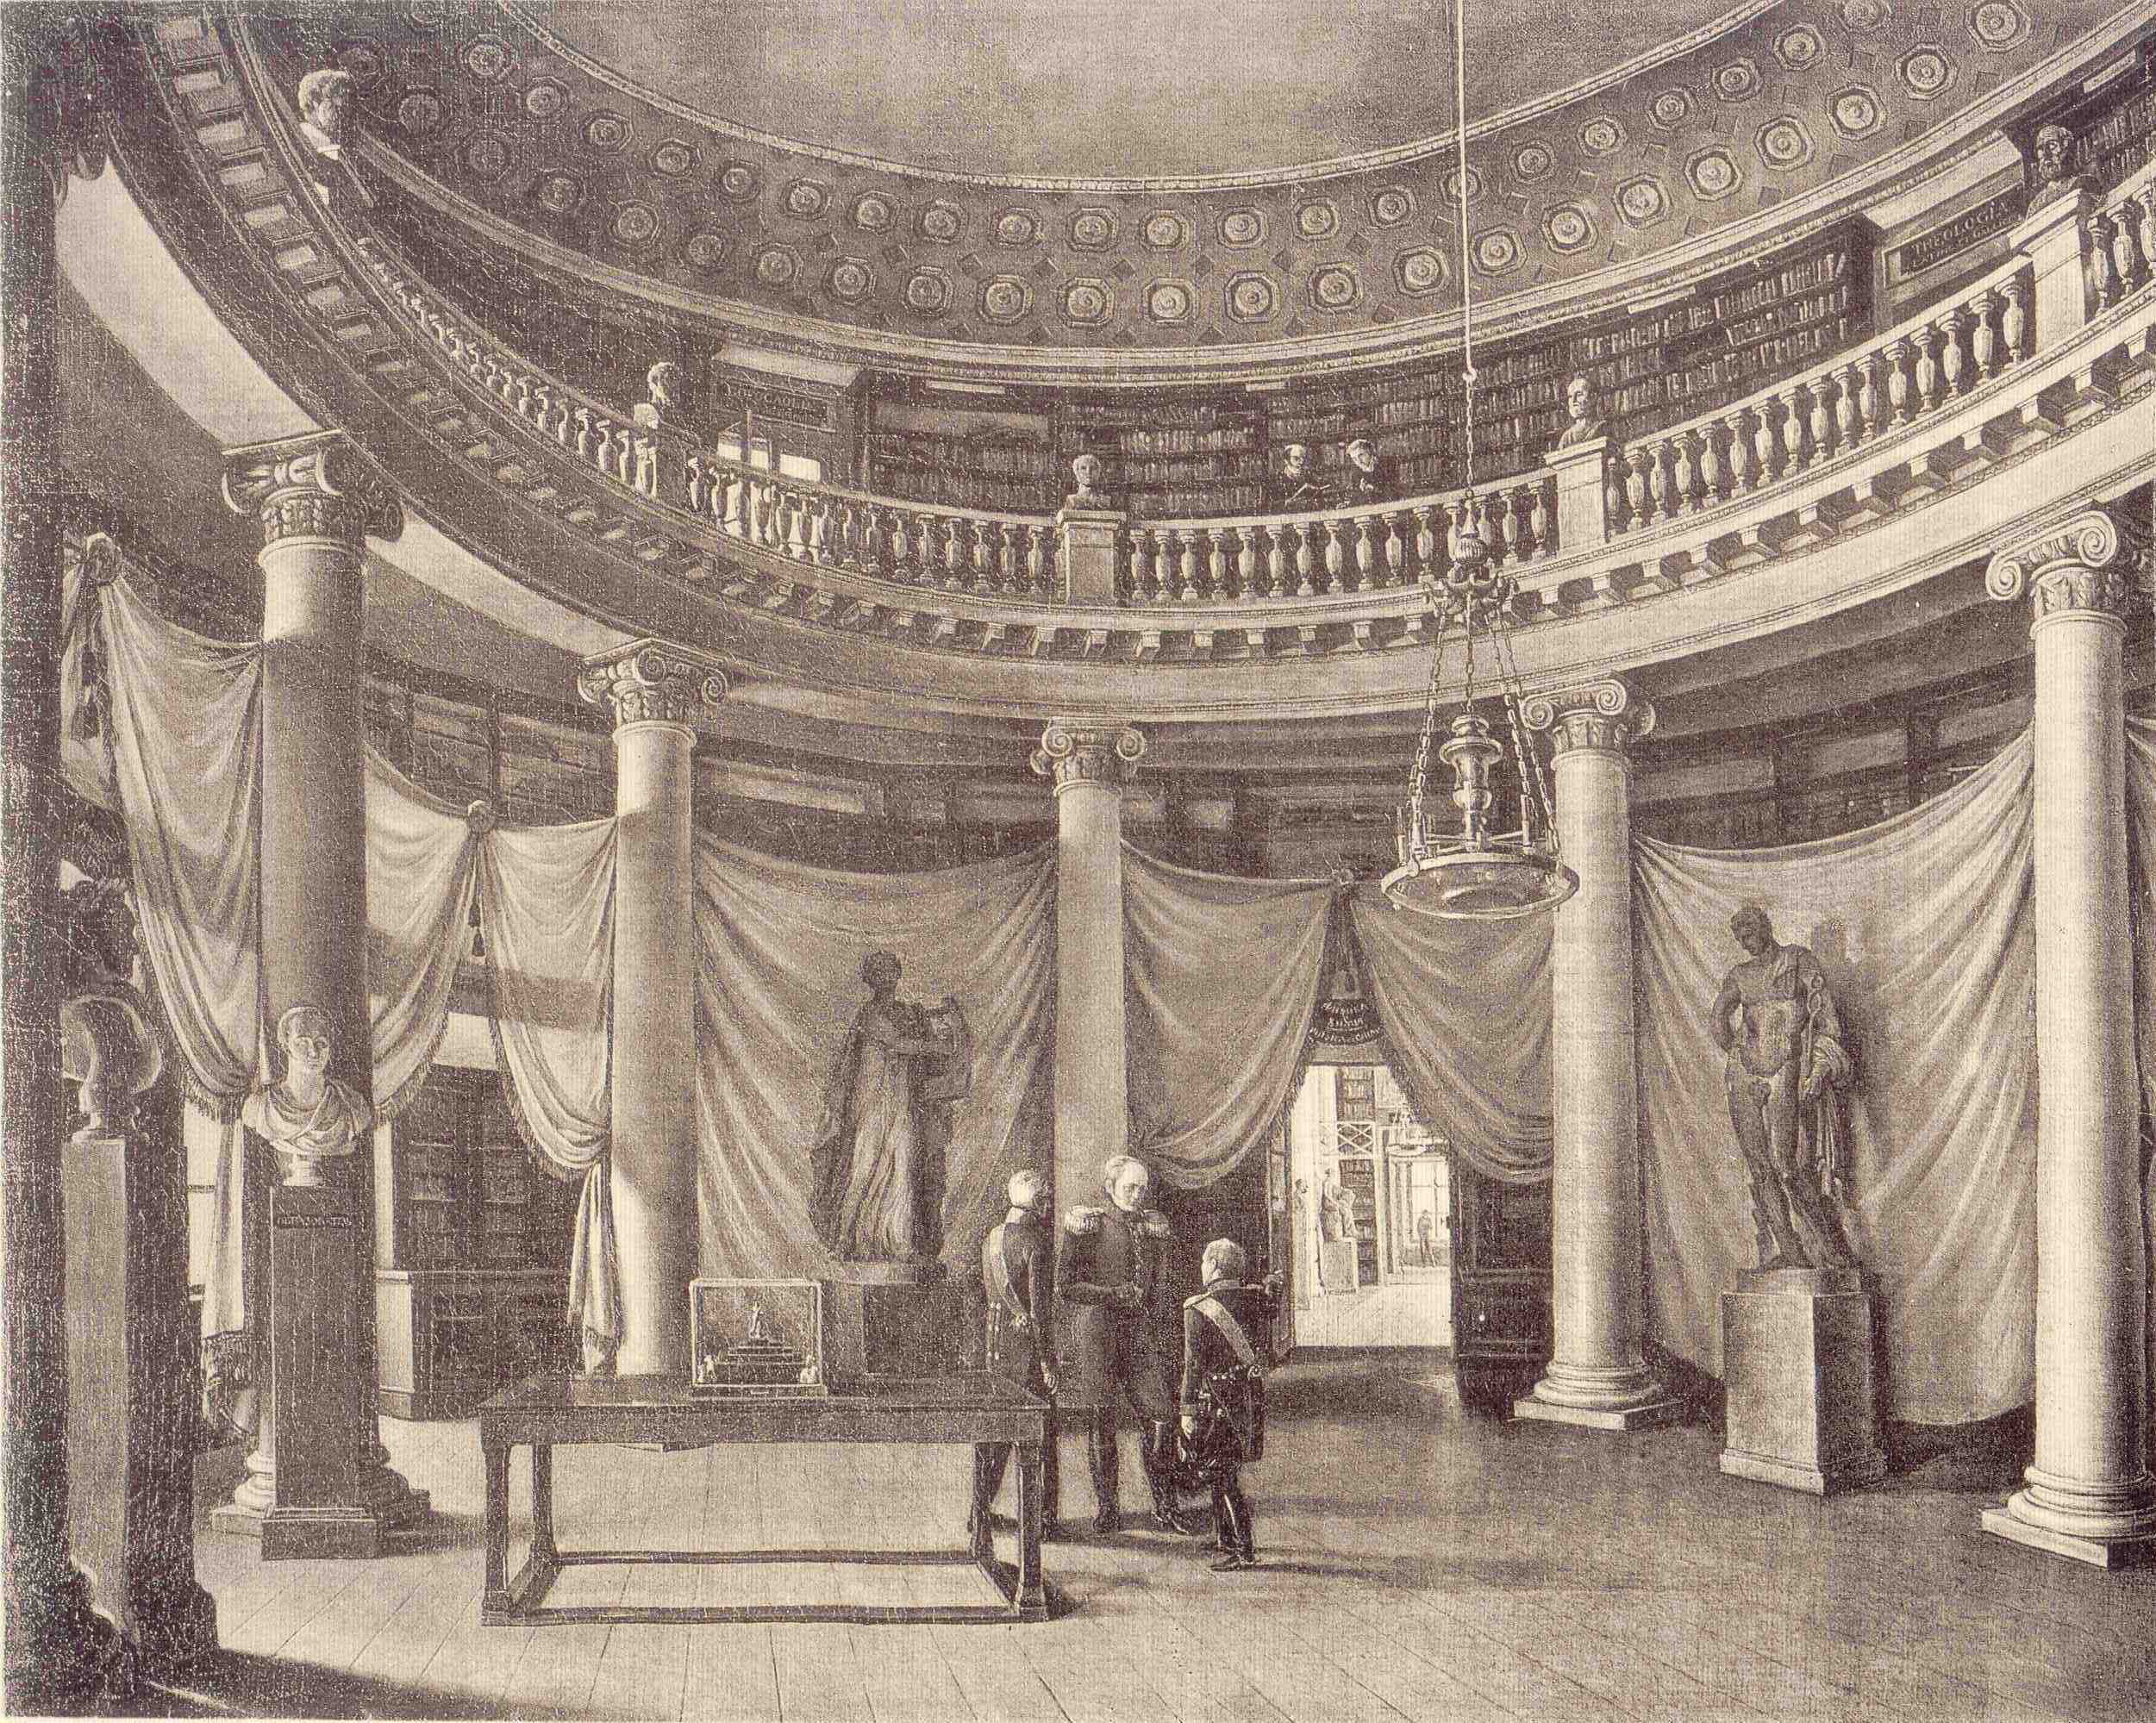 Alexander I's Visit to the Library on 2 January 1812